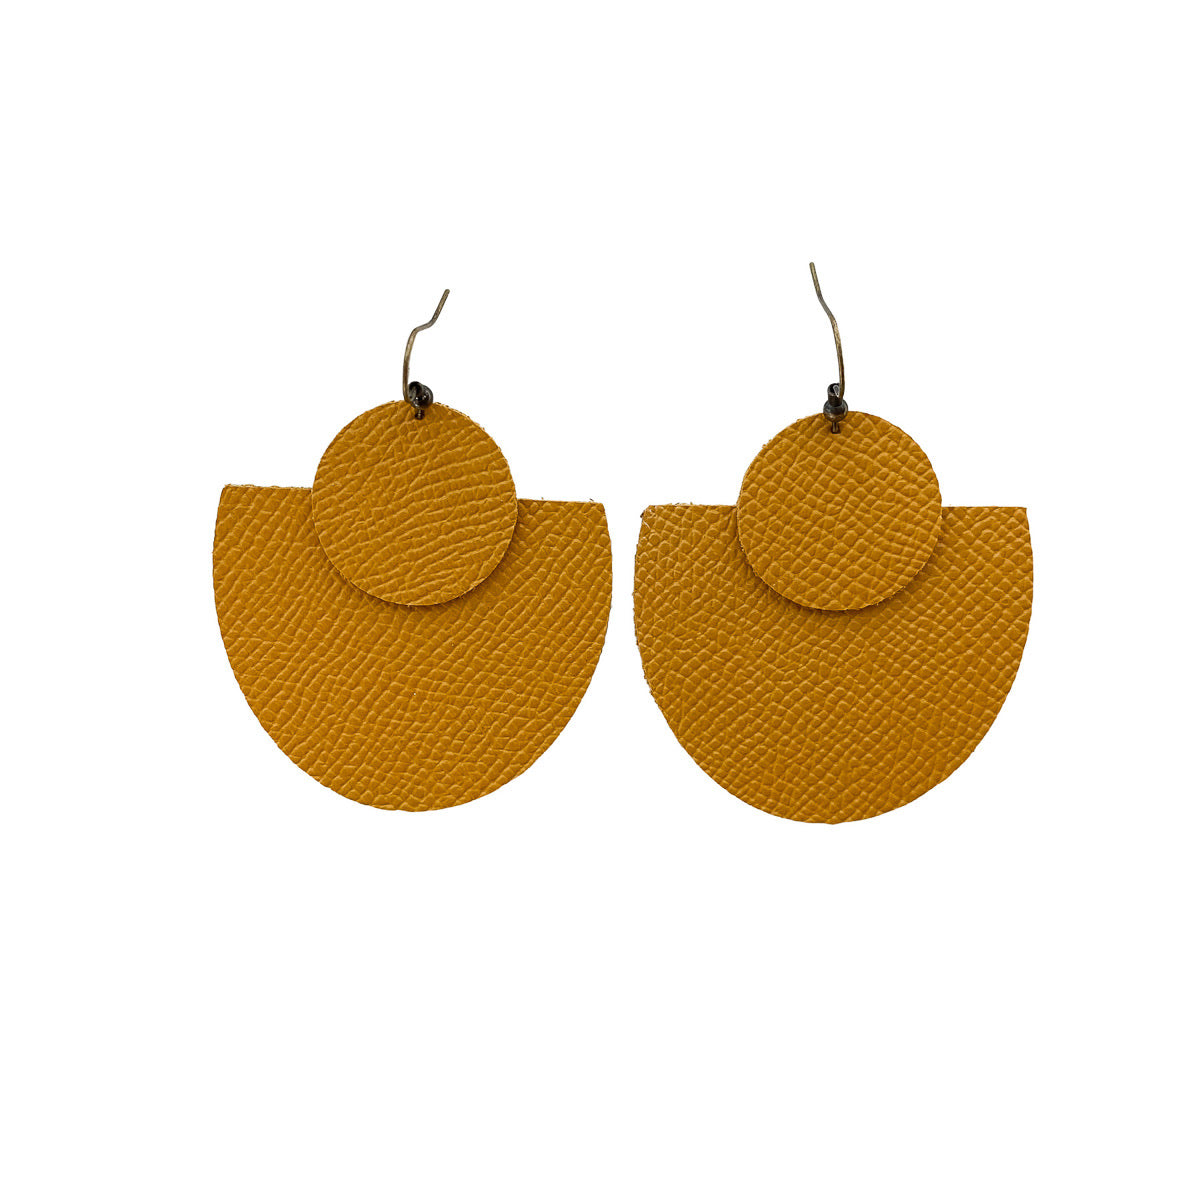 Dallas Earrings - Multiple Colors Available